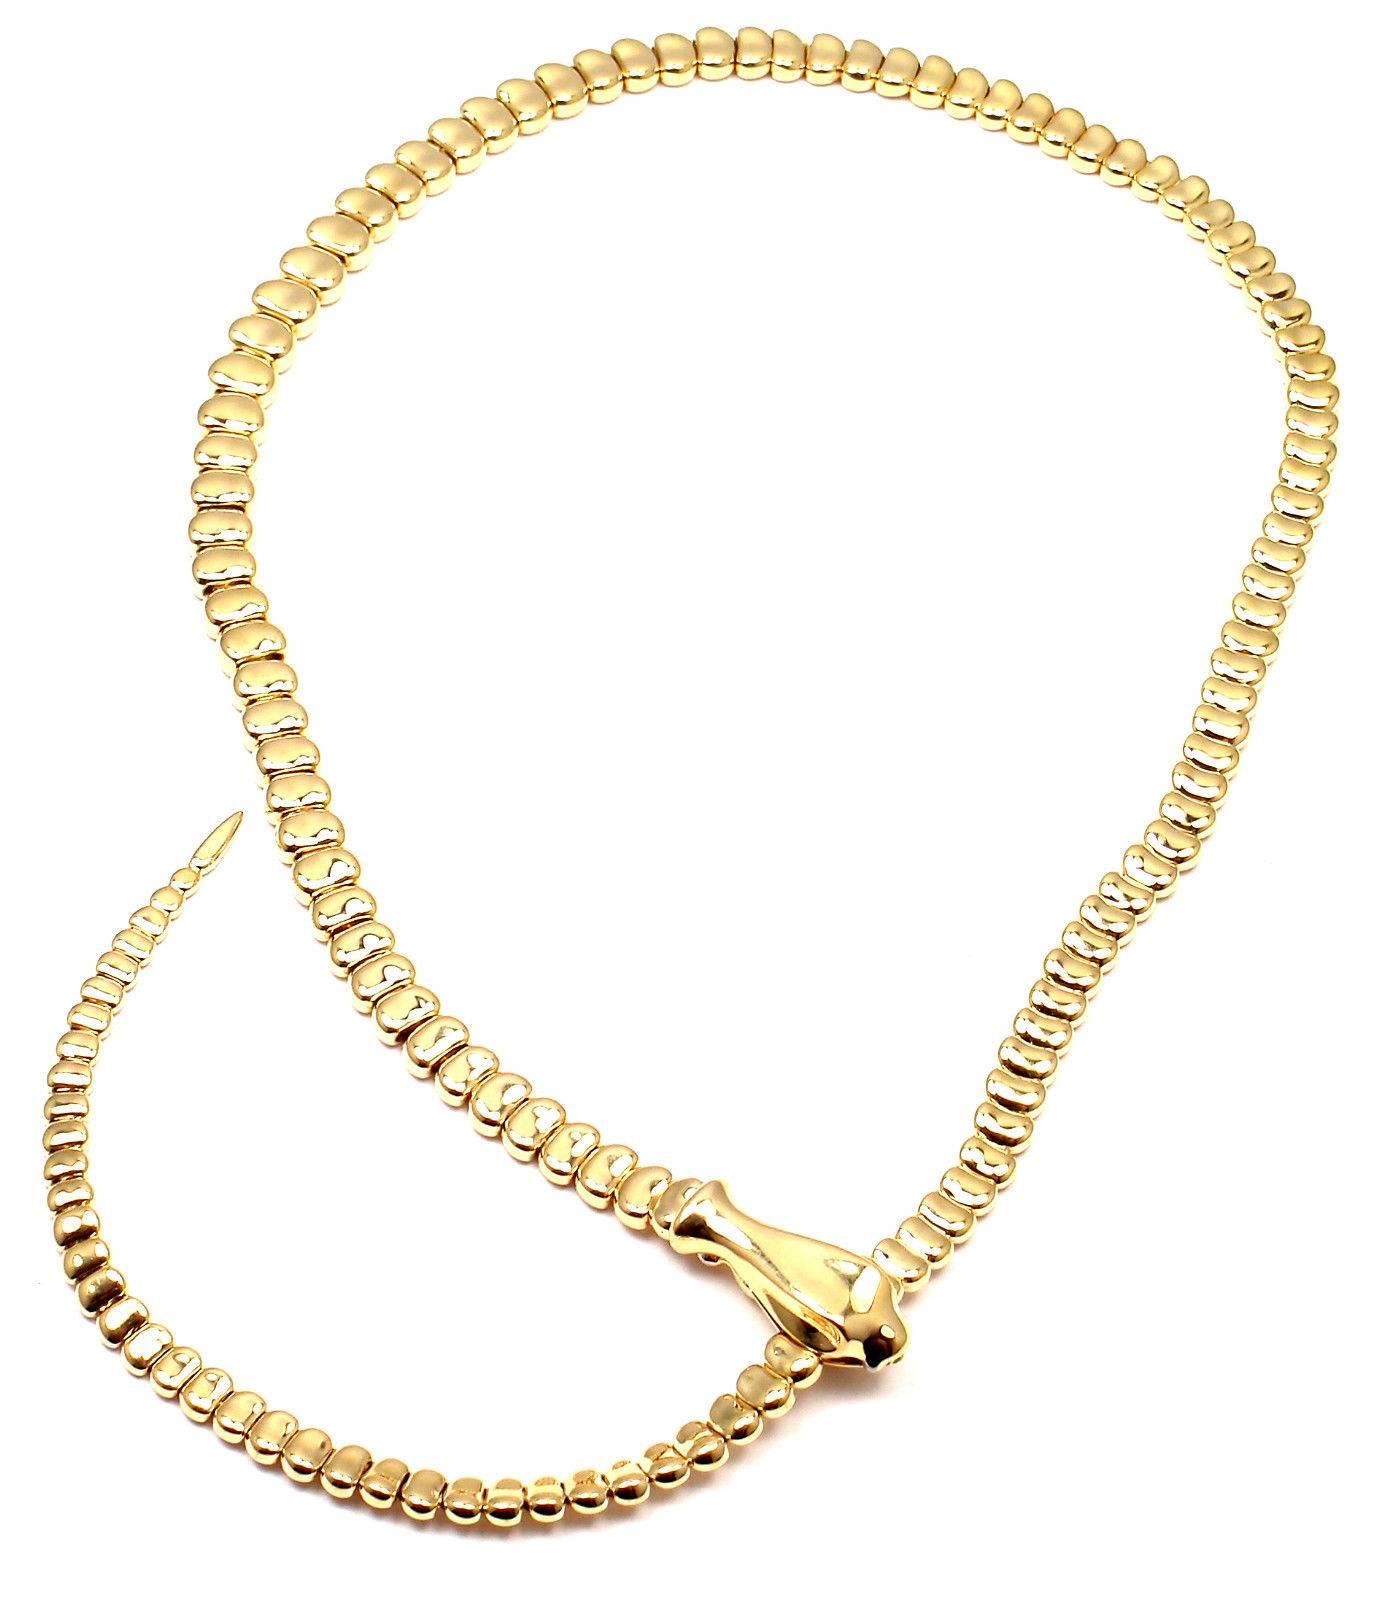 18k Yellow Gold Snake Lariat Necklace by Elsa Peretti for Tiffany & Co.  

Details:
Length: 20